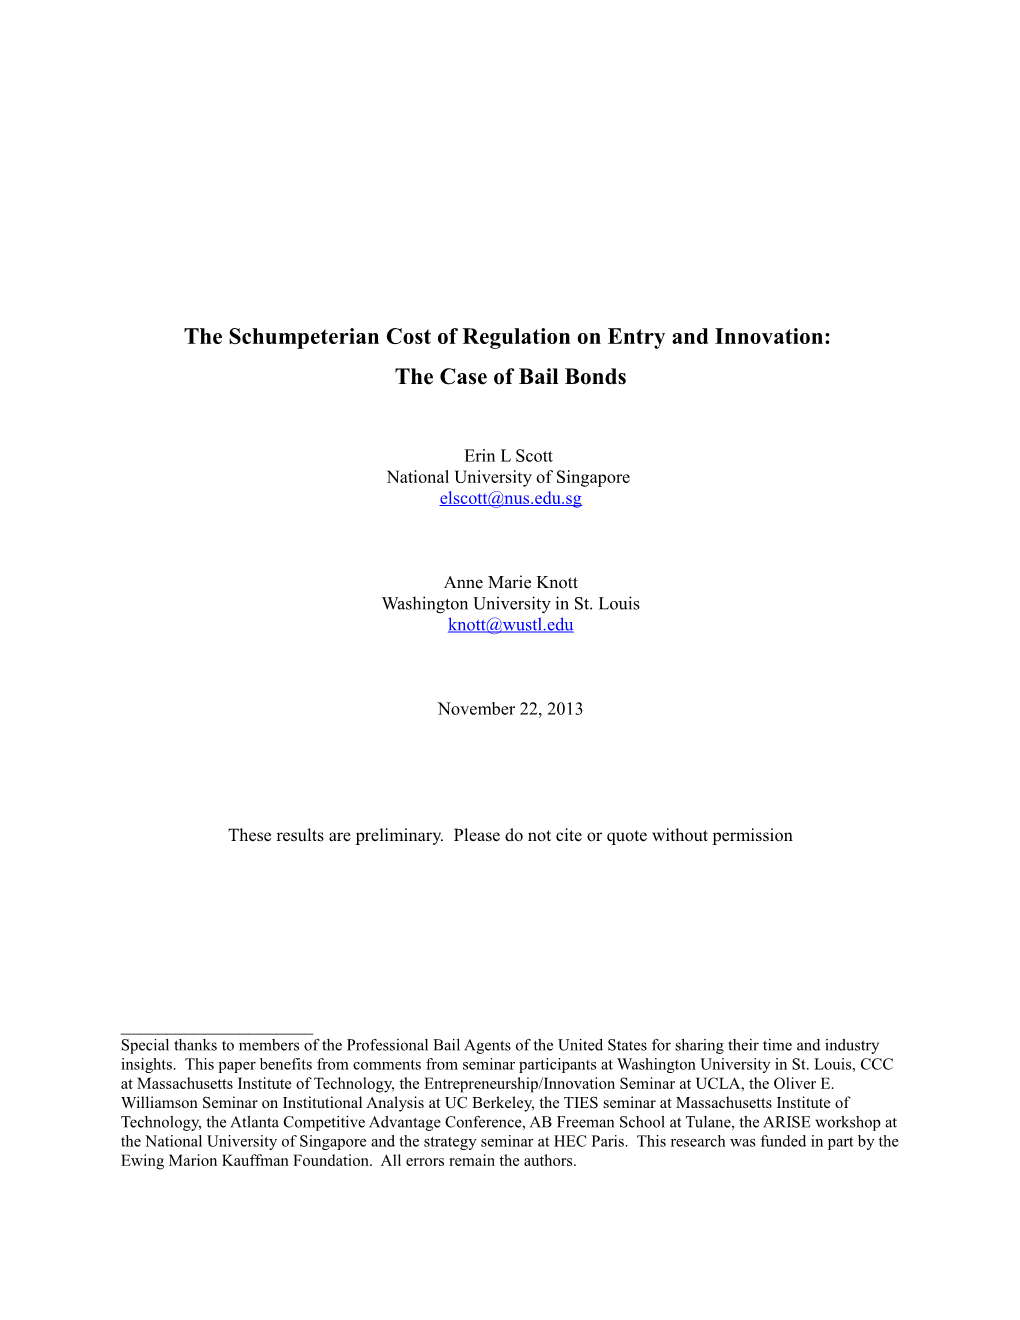 The Schumpeterian Cost of Regulation on Entry and Innovation